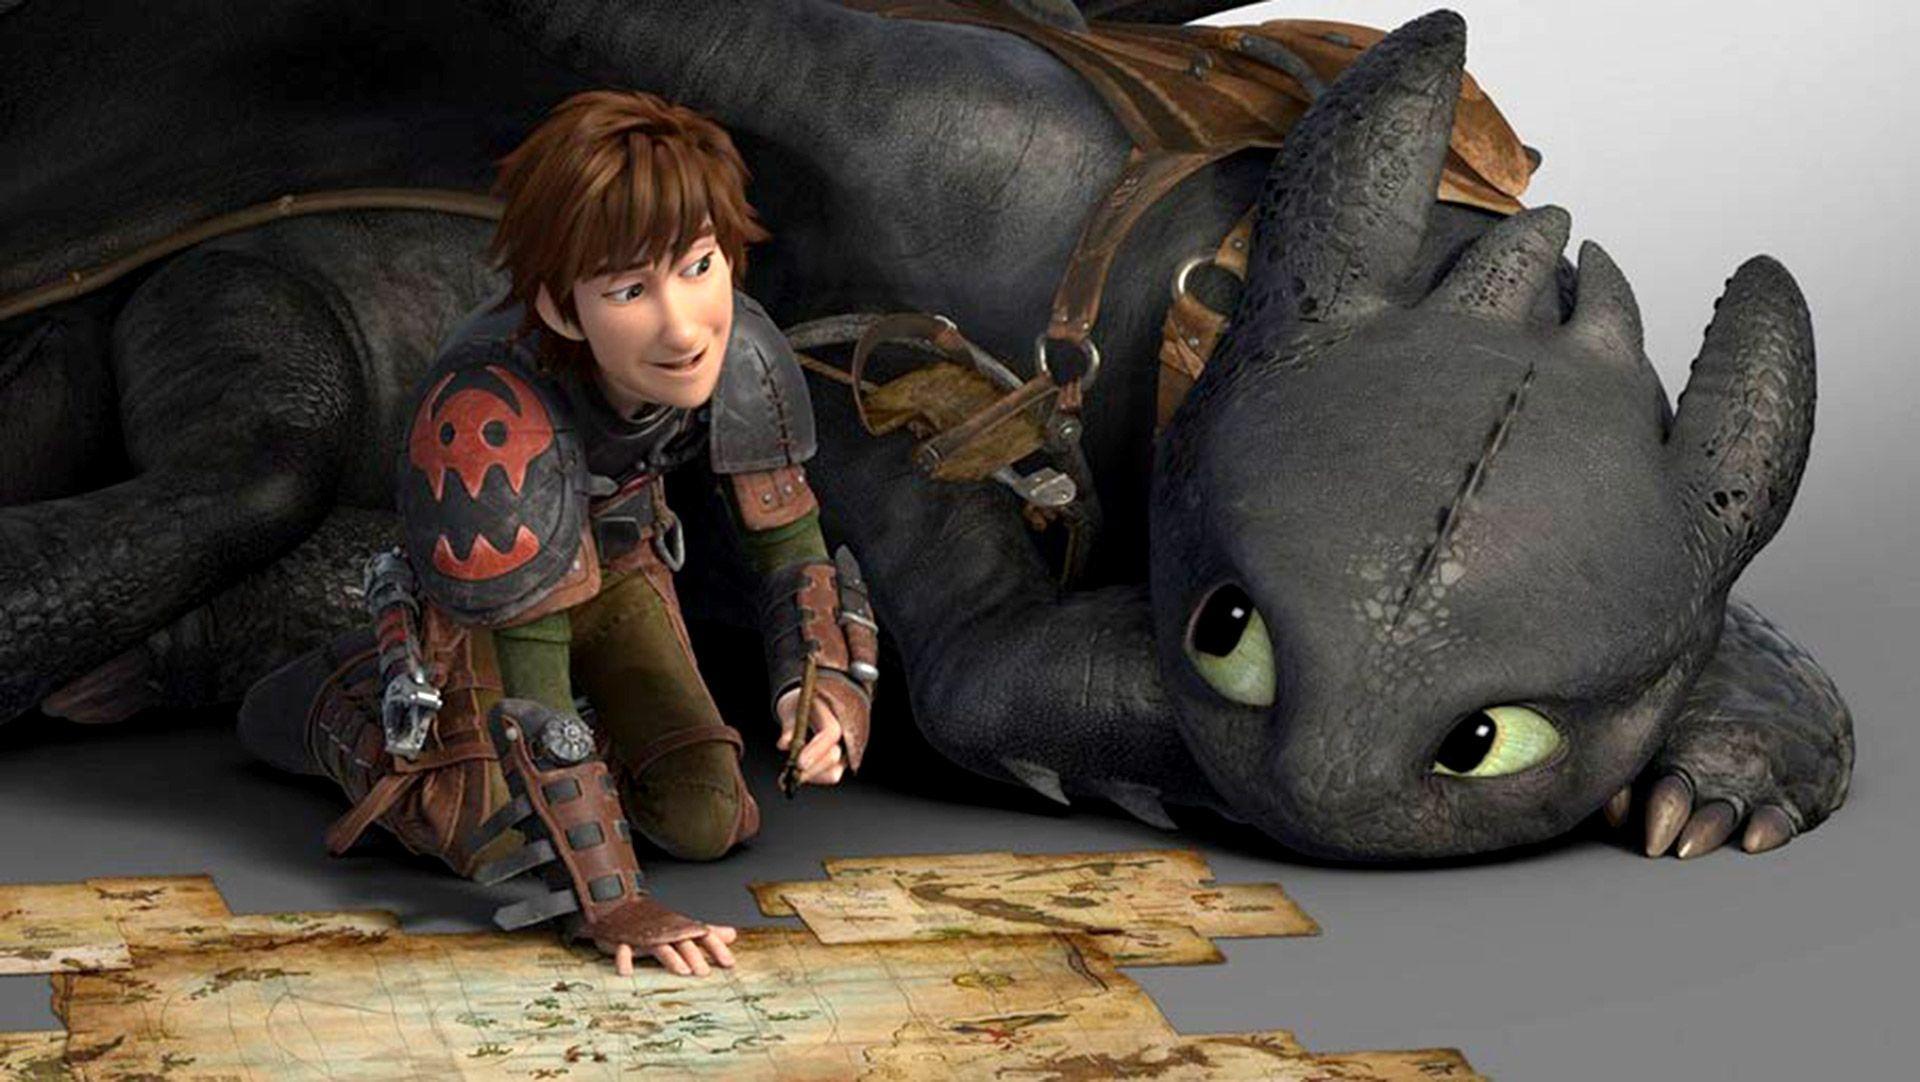 Movies Wallpaper: How To Train Your Dragon Wallpaper Astrid